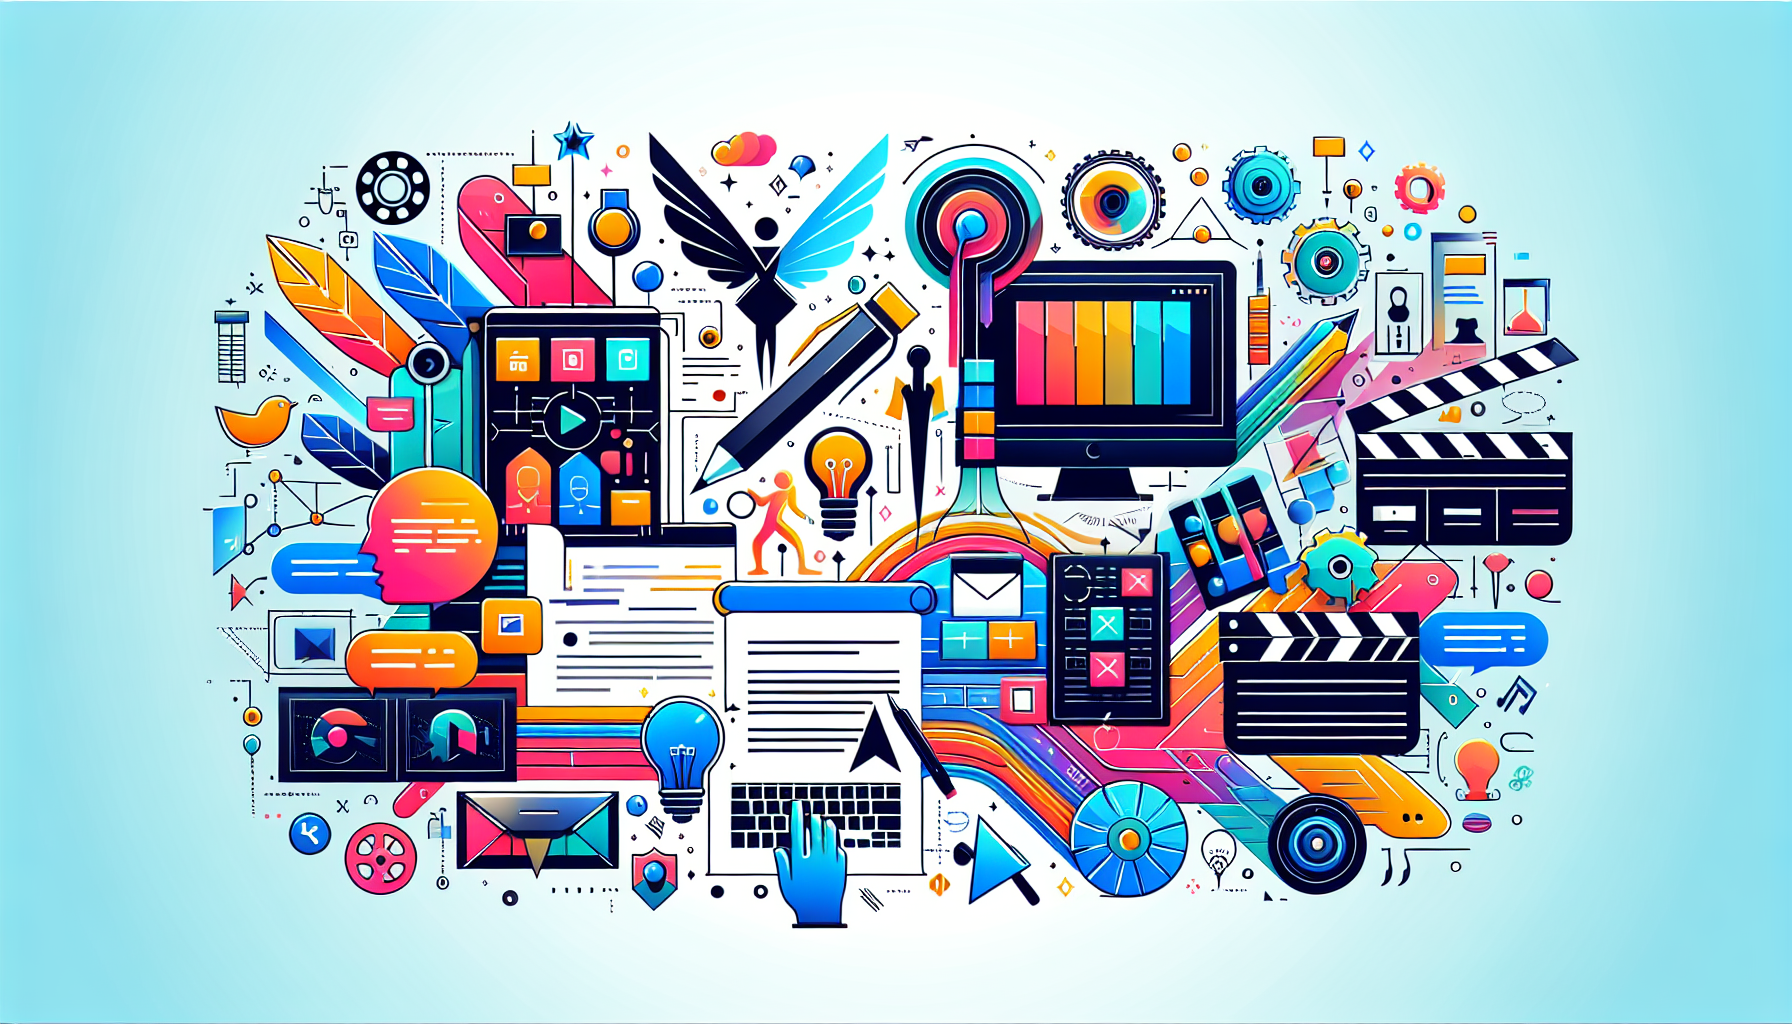 A dynamic and modern illustration showcasing various elements associated with screenwriting software. It can include symbols like editing tools, draft versions, storyboard frames, character profiles, typing on a script etc. The design must be colorful with a balance of bright and pastel colors to maintain a modern and light-hearted tone. Pay special attention to the fluidity and ease of use elements that most top screenwriting software display. The style should be digital and sleek, with a touch of creativity to underline the writer's creative process. There should be no words or text included in this art piece.